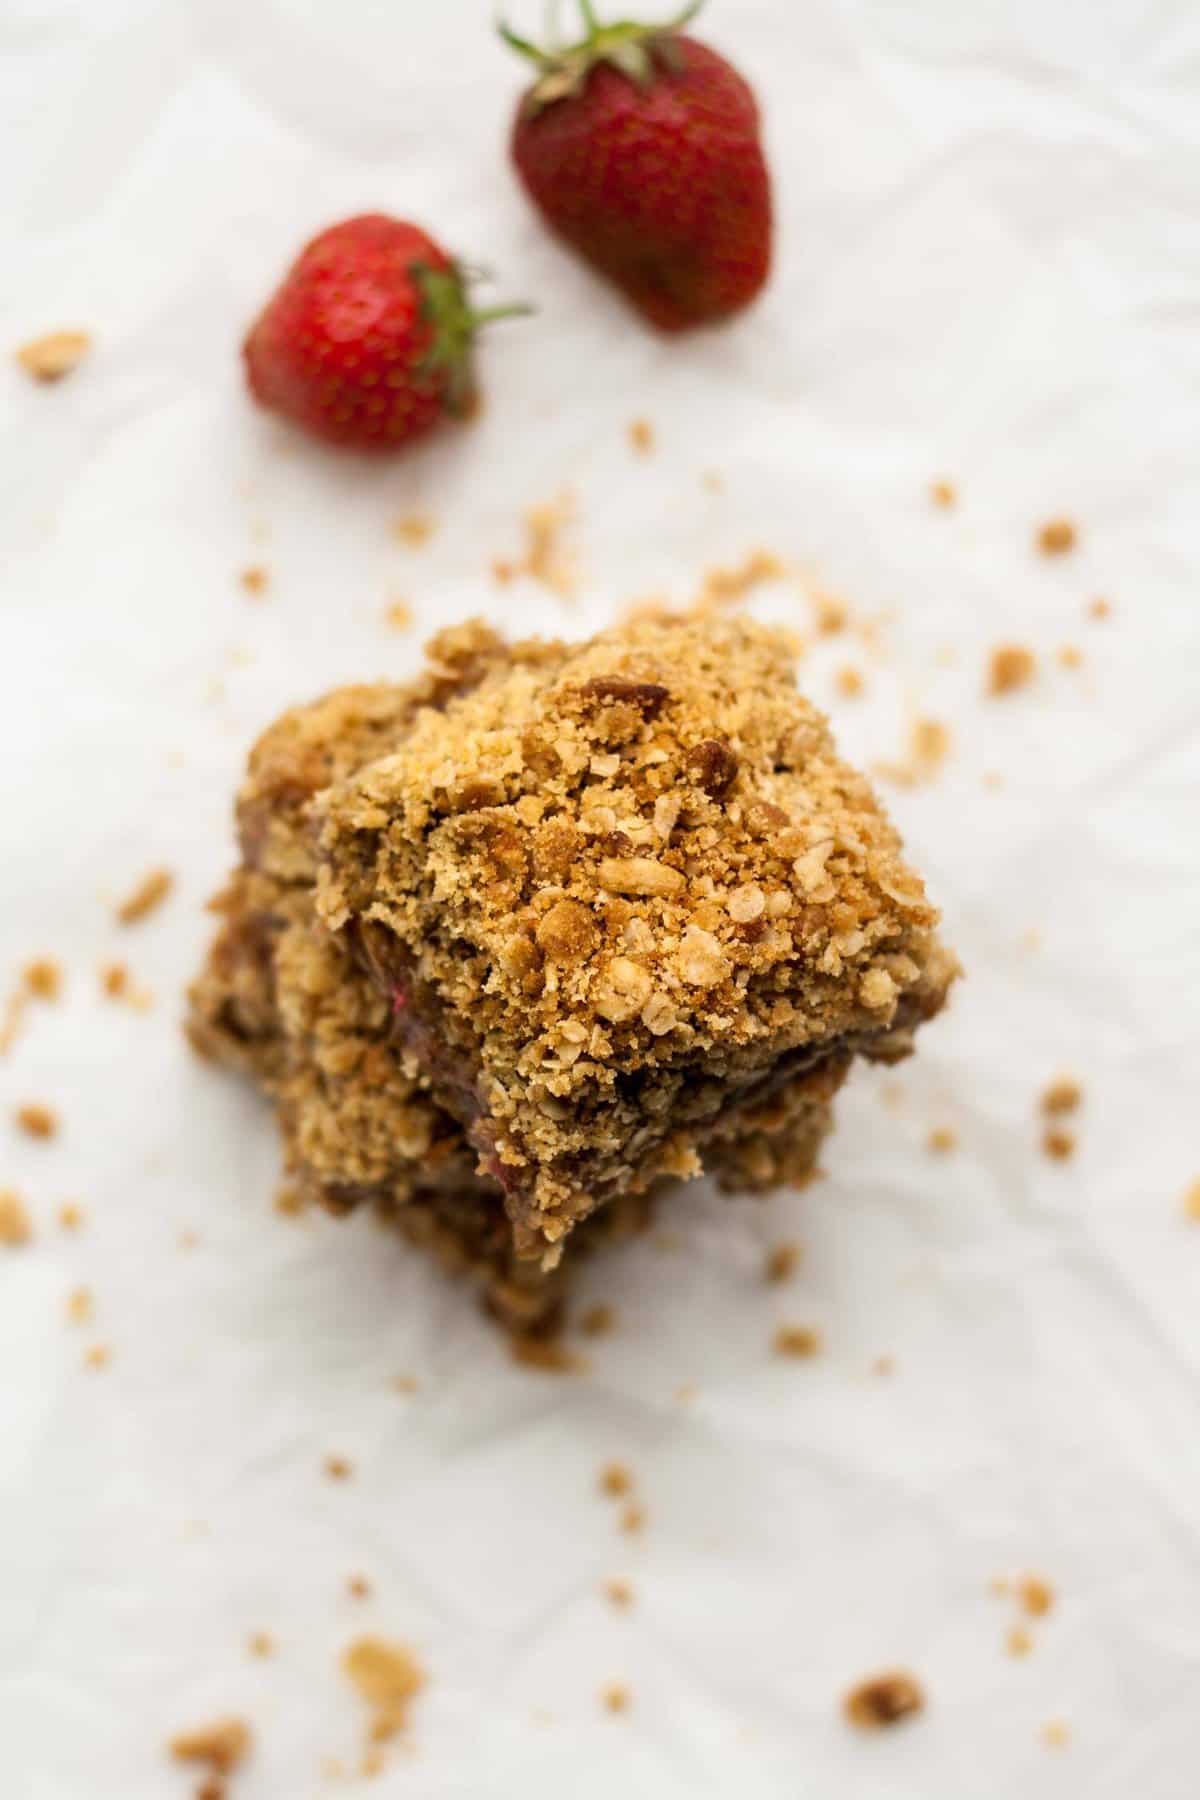 Strawberry Rhubarb Brown Butter Oatmeal Bars - these gooey oatmeal bars are quick and easy to make and are totally addictive! | eatloveeats.com